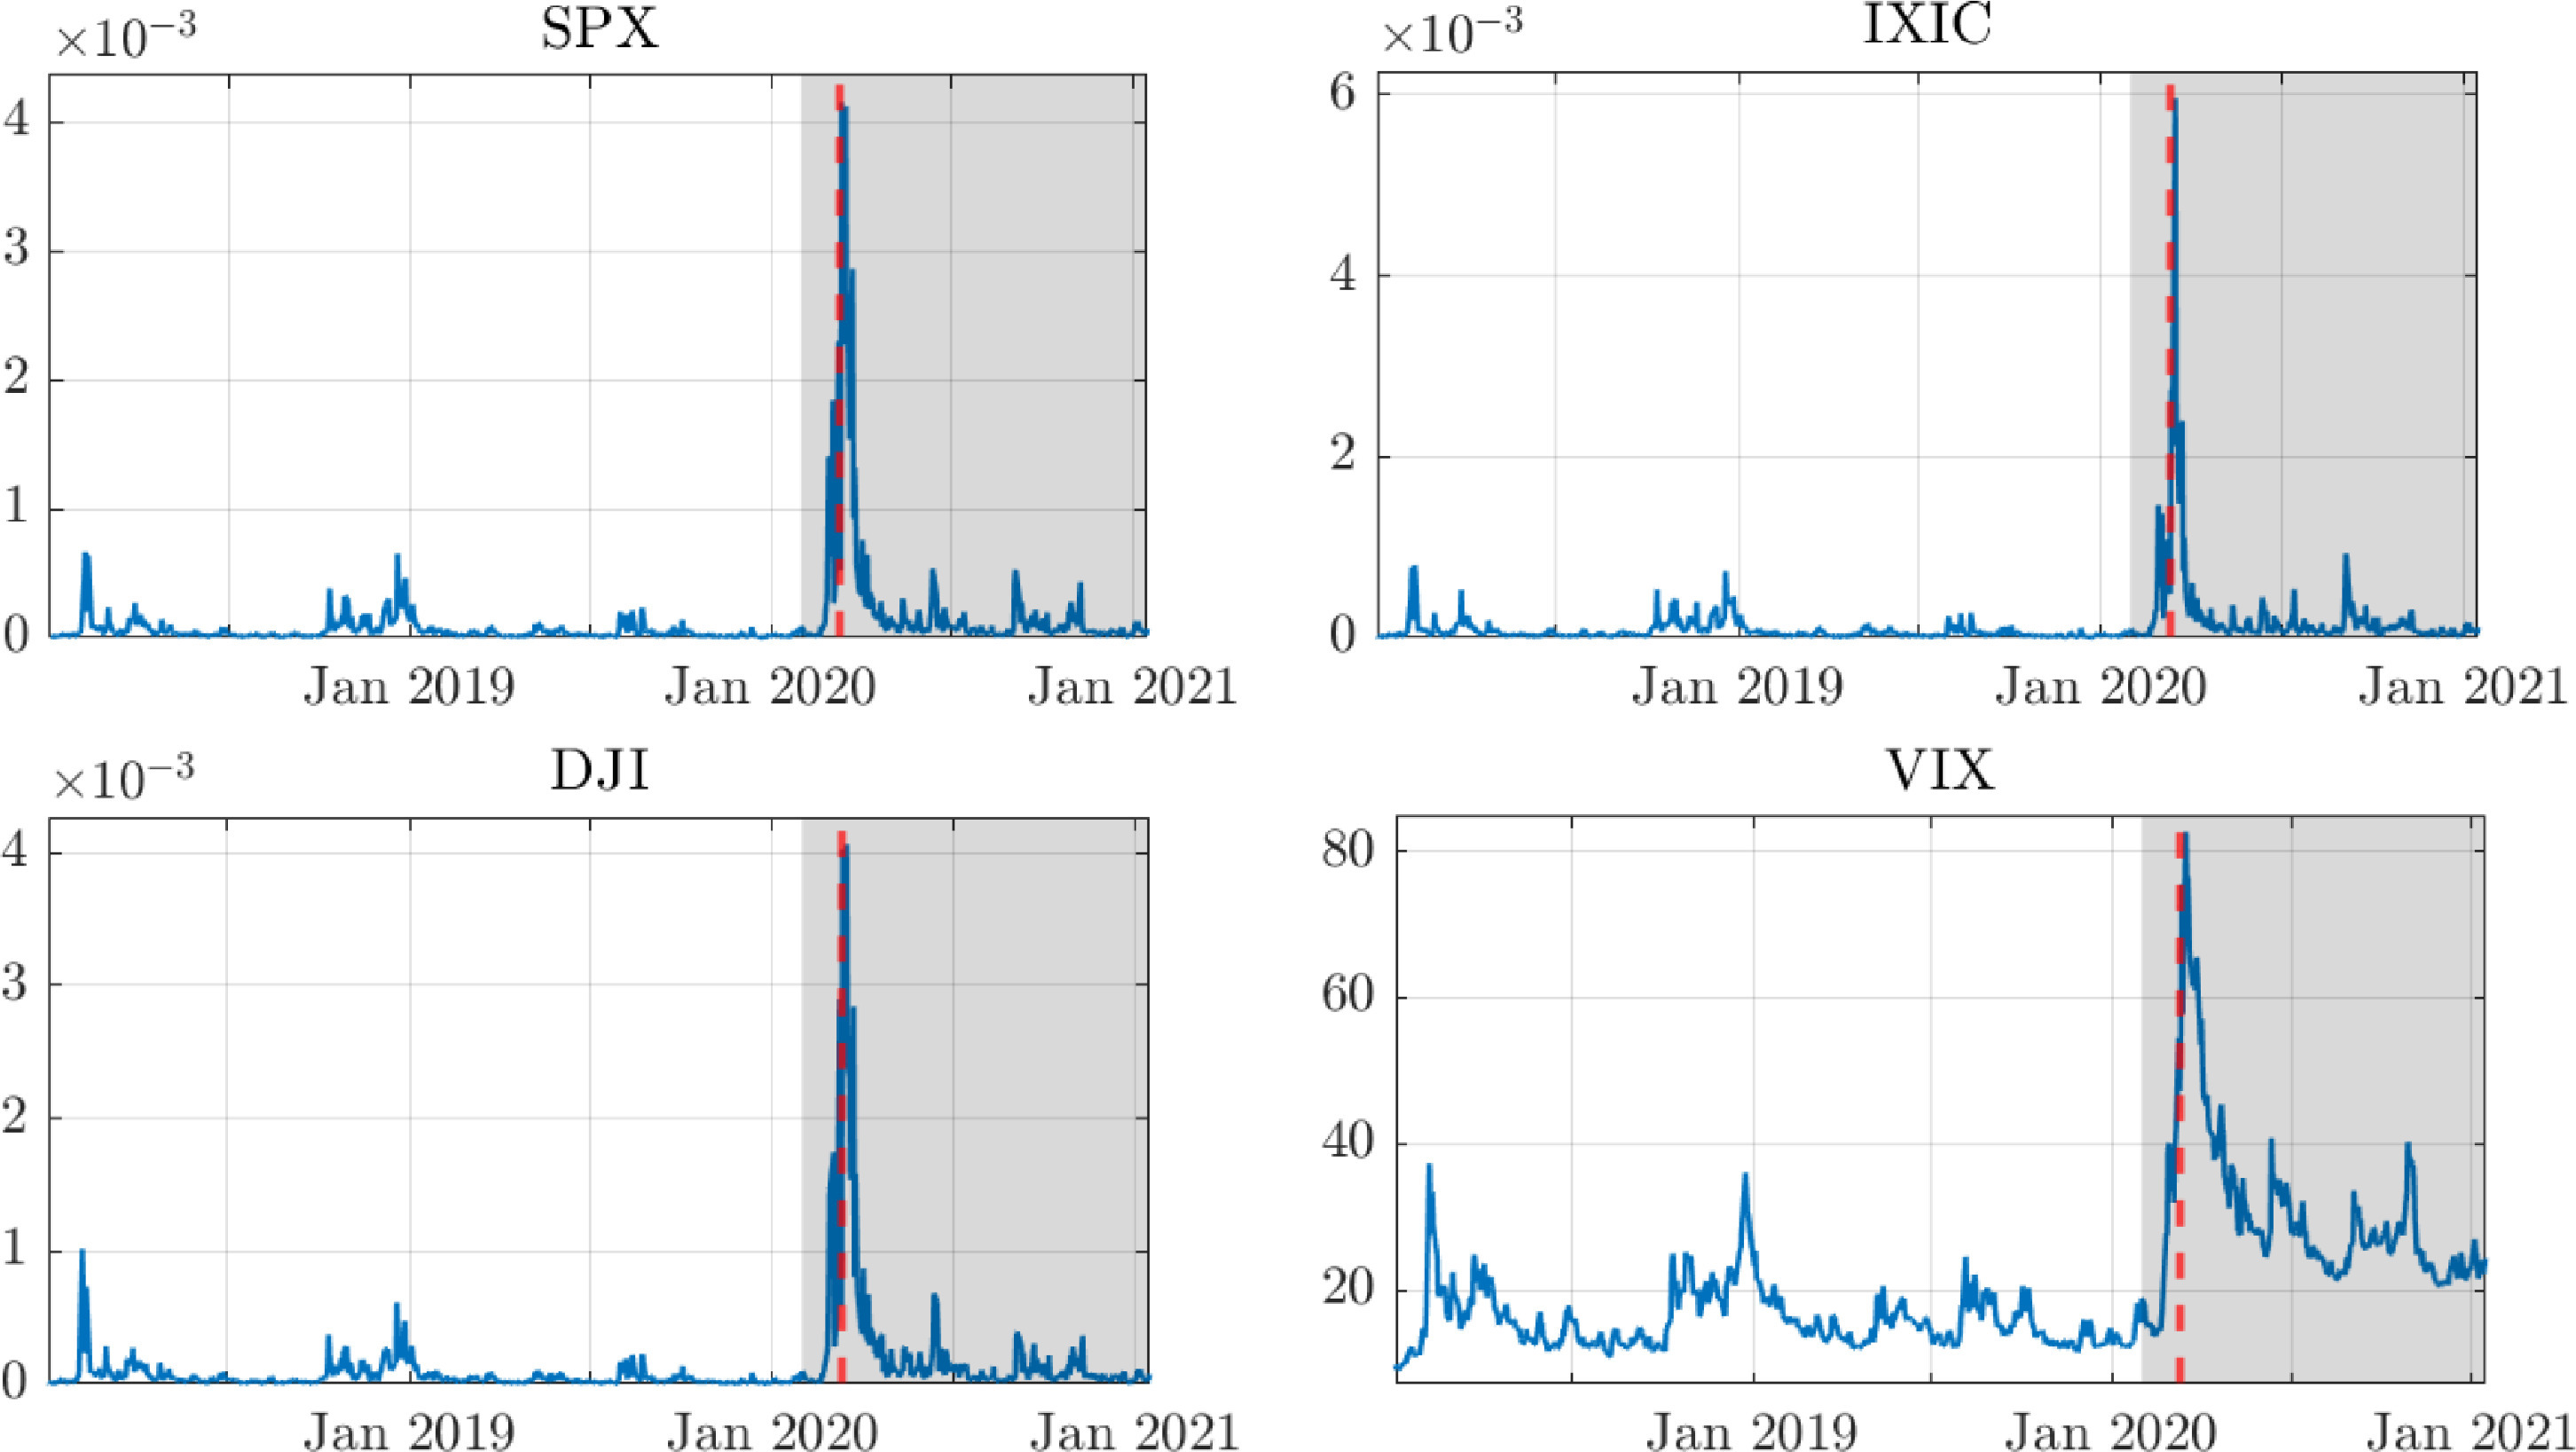 VIX and realized variance measures for the S&P 500 (SPX), the Nasdaq 100 (IXIC), and the Dow Jones Industrial Average (DJI) pre and post-COVID19